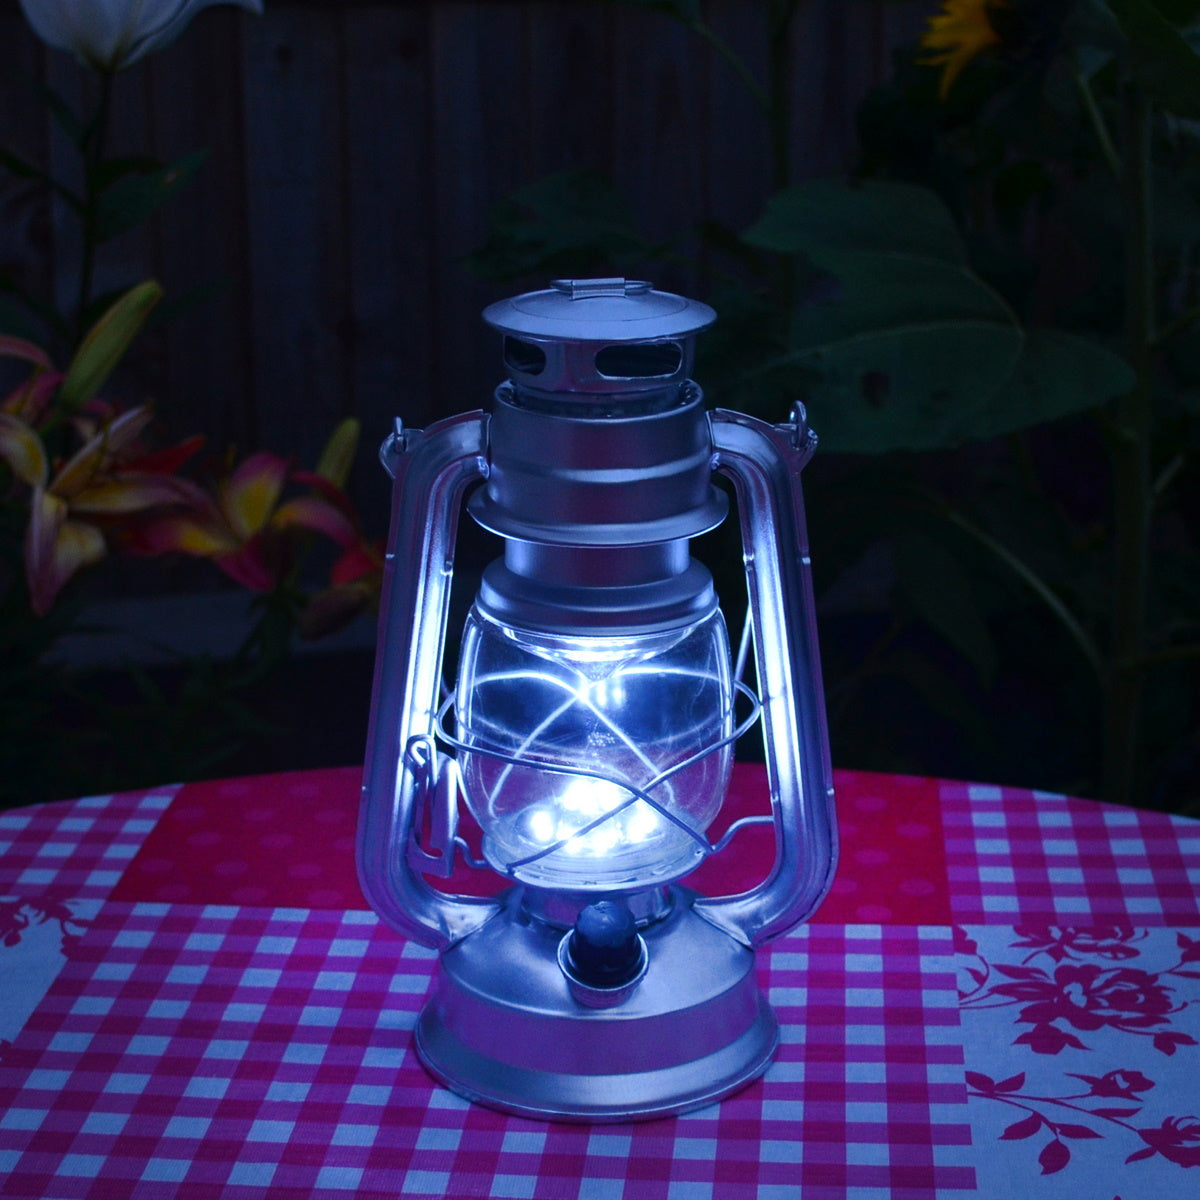 Amtech S8010 Hurricane Lamp 15 LED Battery Powered - Premium Lanterns from DK Tools - Just $10.99! Shop now at W Hurst & Son (IW) Ltd